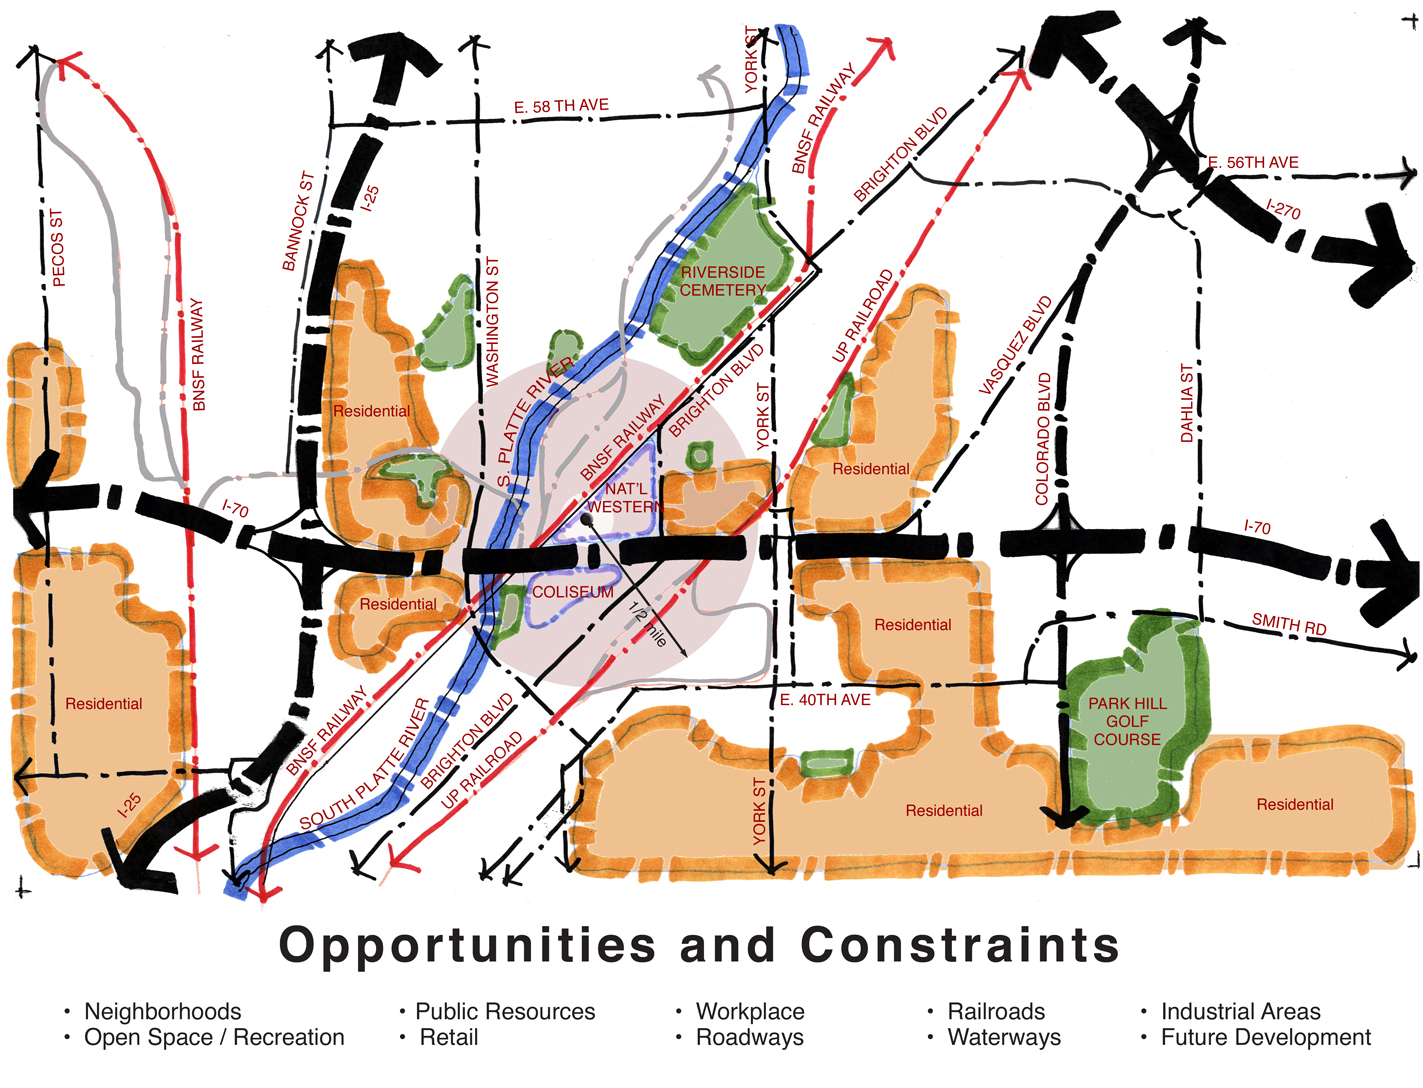 Opportunities and Constraints